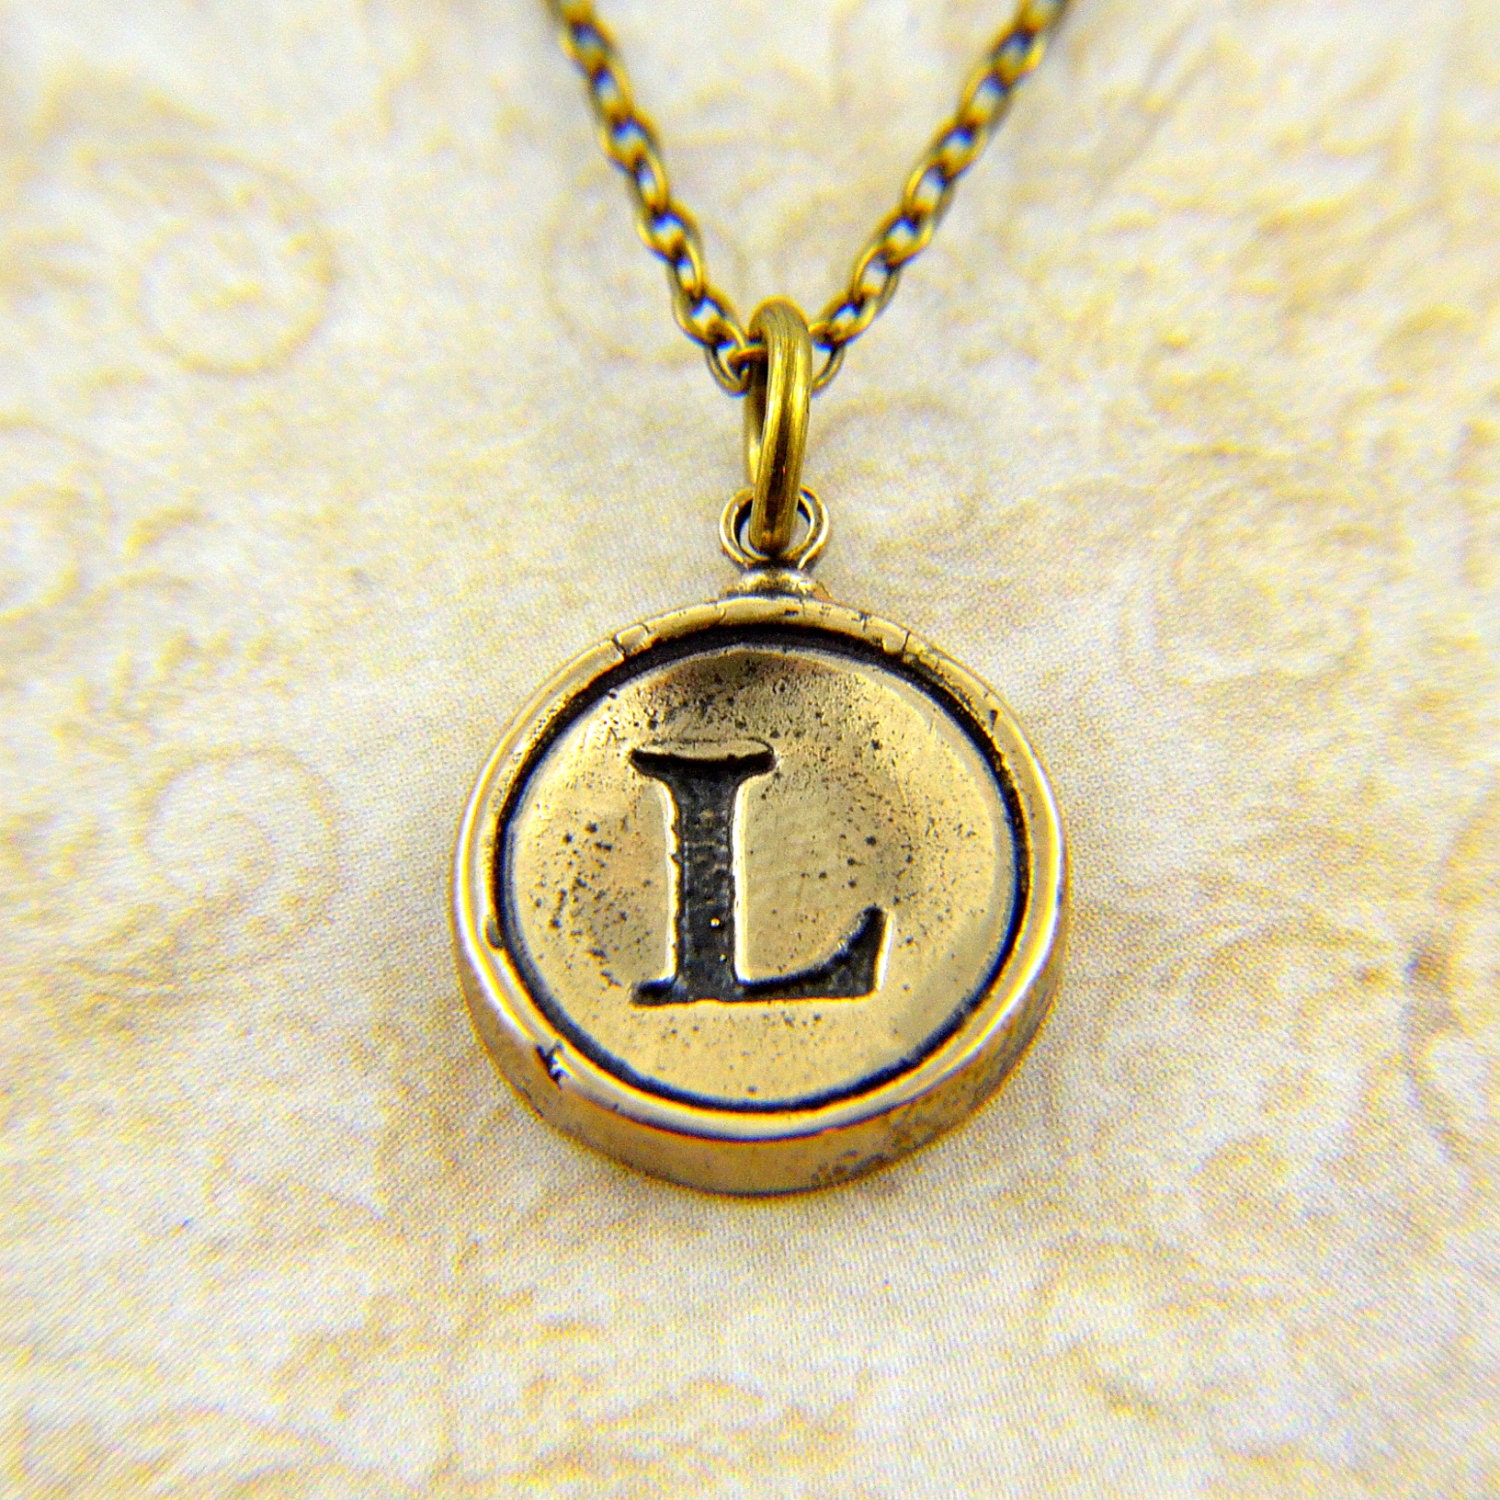 Typewriter Key Pendant Necklace Charm - Bronze  - Letter L - Other Letters Available